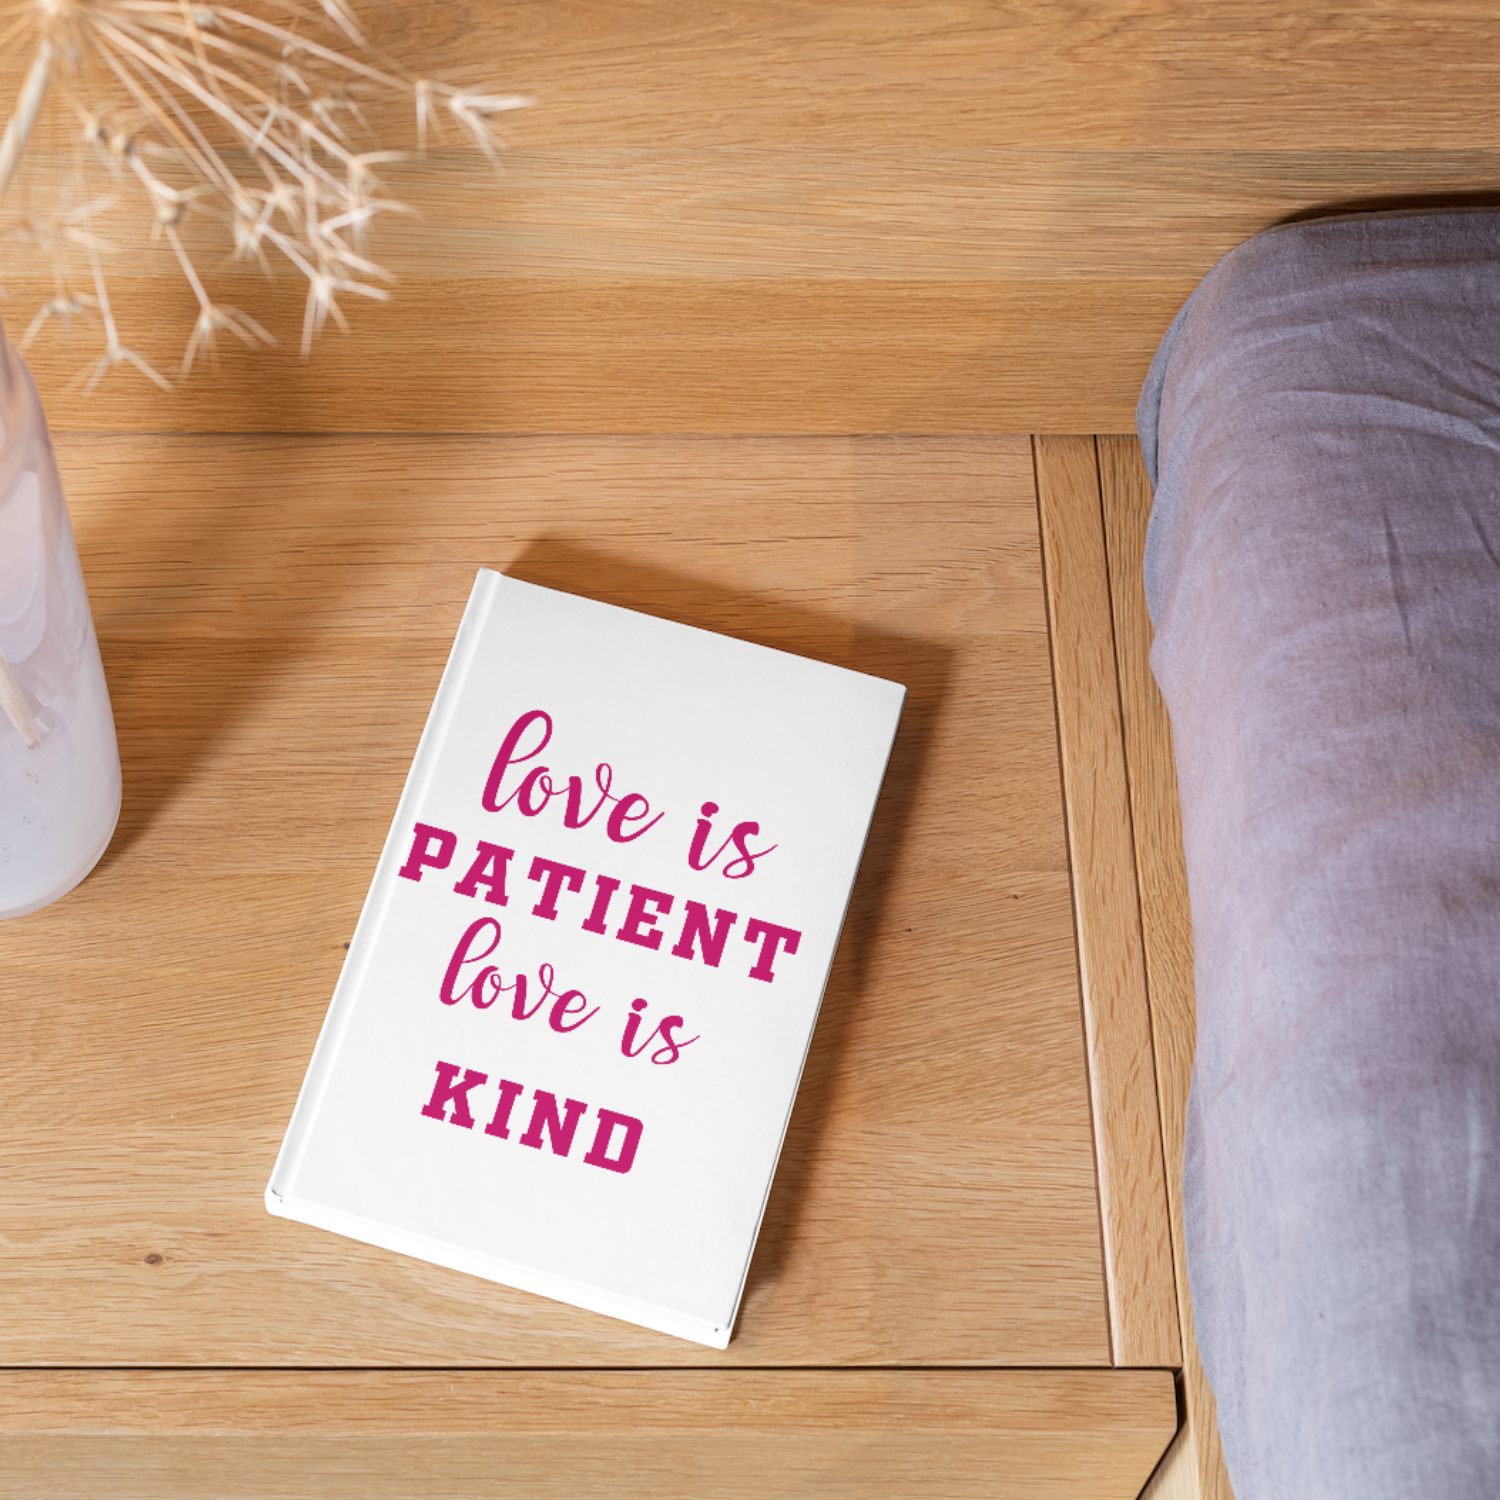 Love is patient love is kind SVG | Digital Download | Cut File | SVG Only The Sweet Stuff